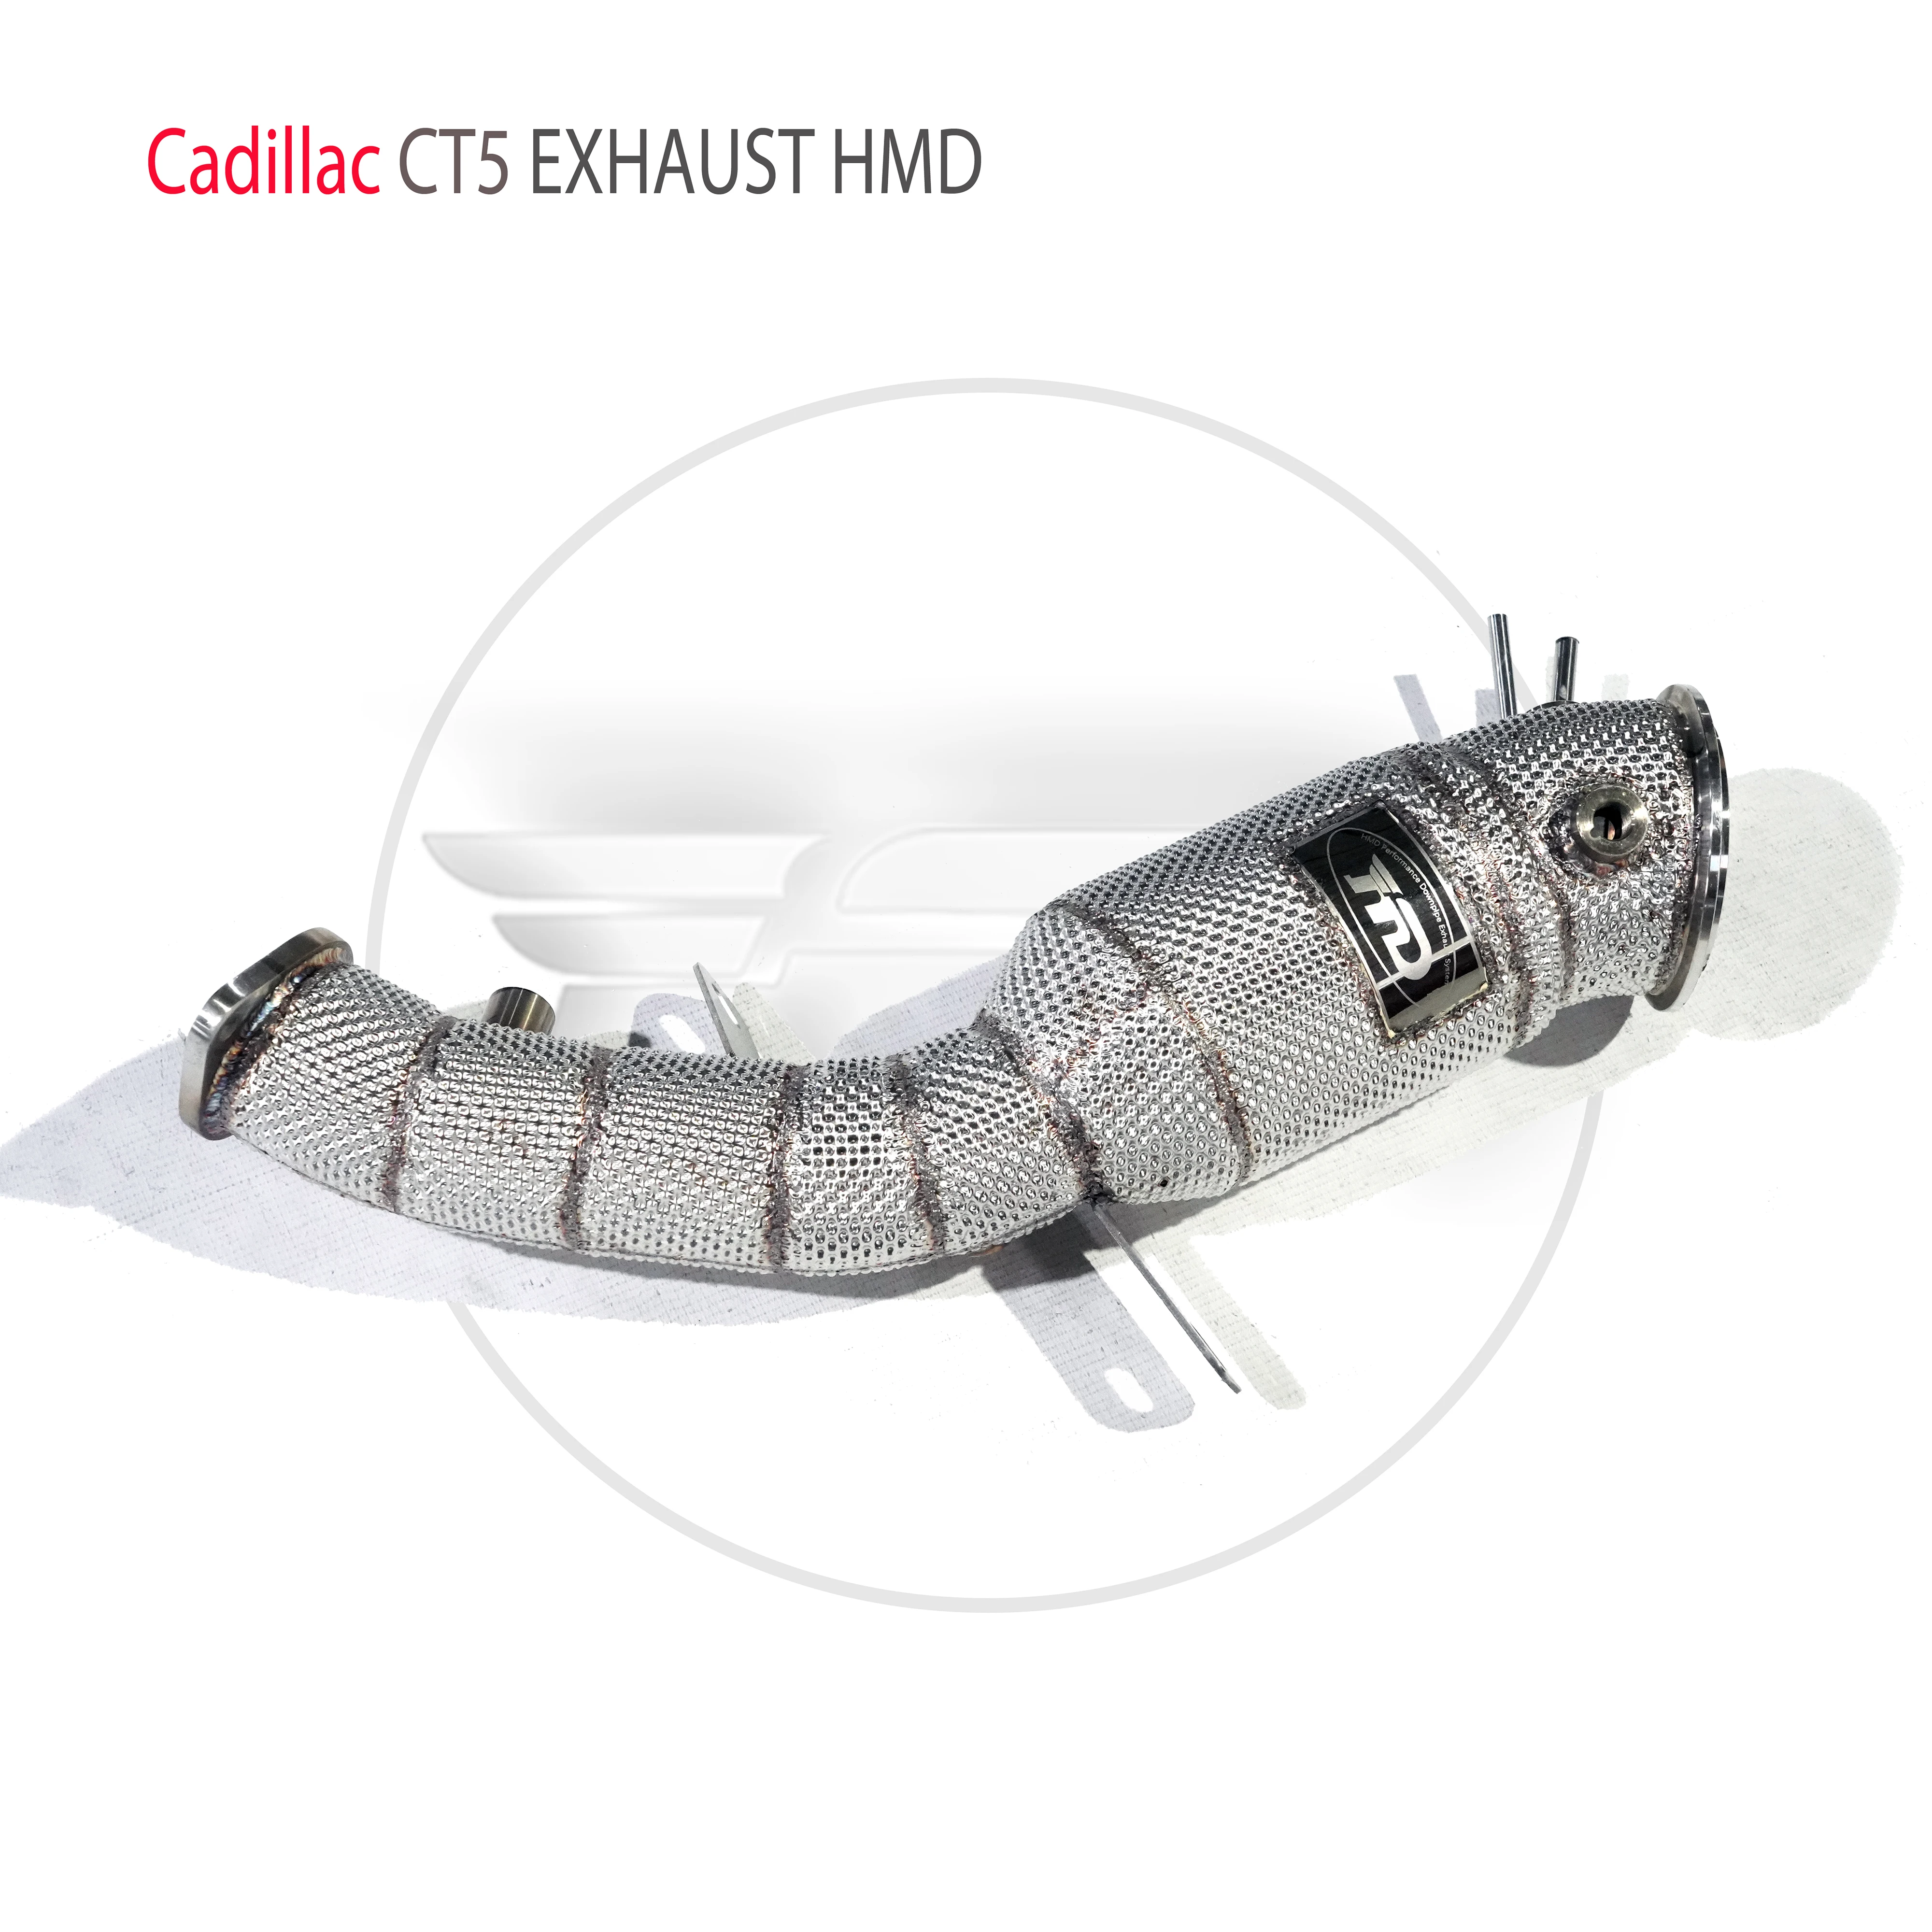 

HMD Stainless Steel Exhaust Peformance Manifold Downpipe for Cadillac CT5 Car Accessories With Catalytic Converter Header